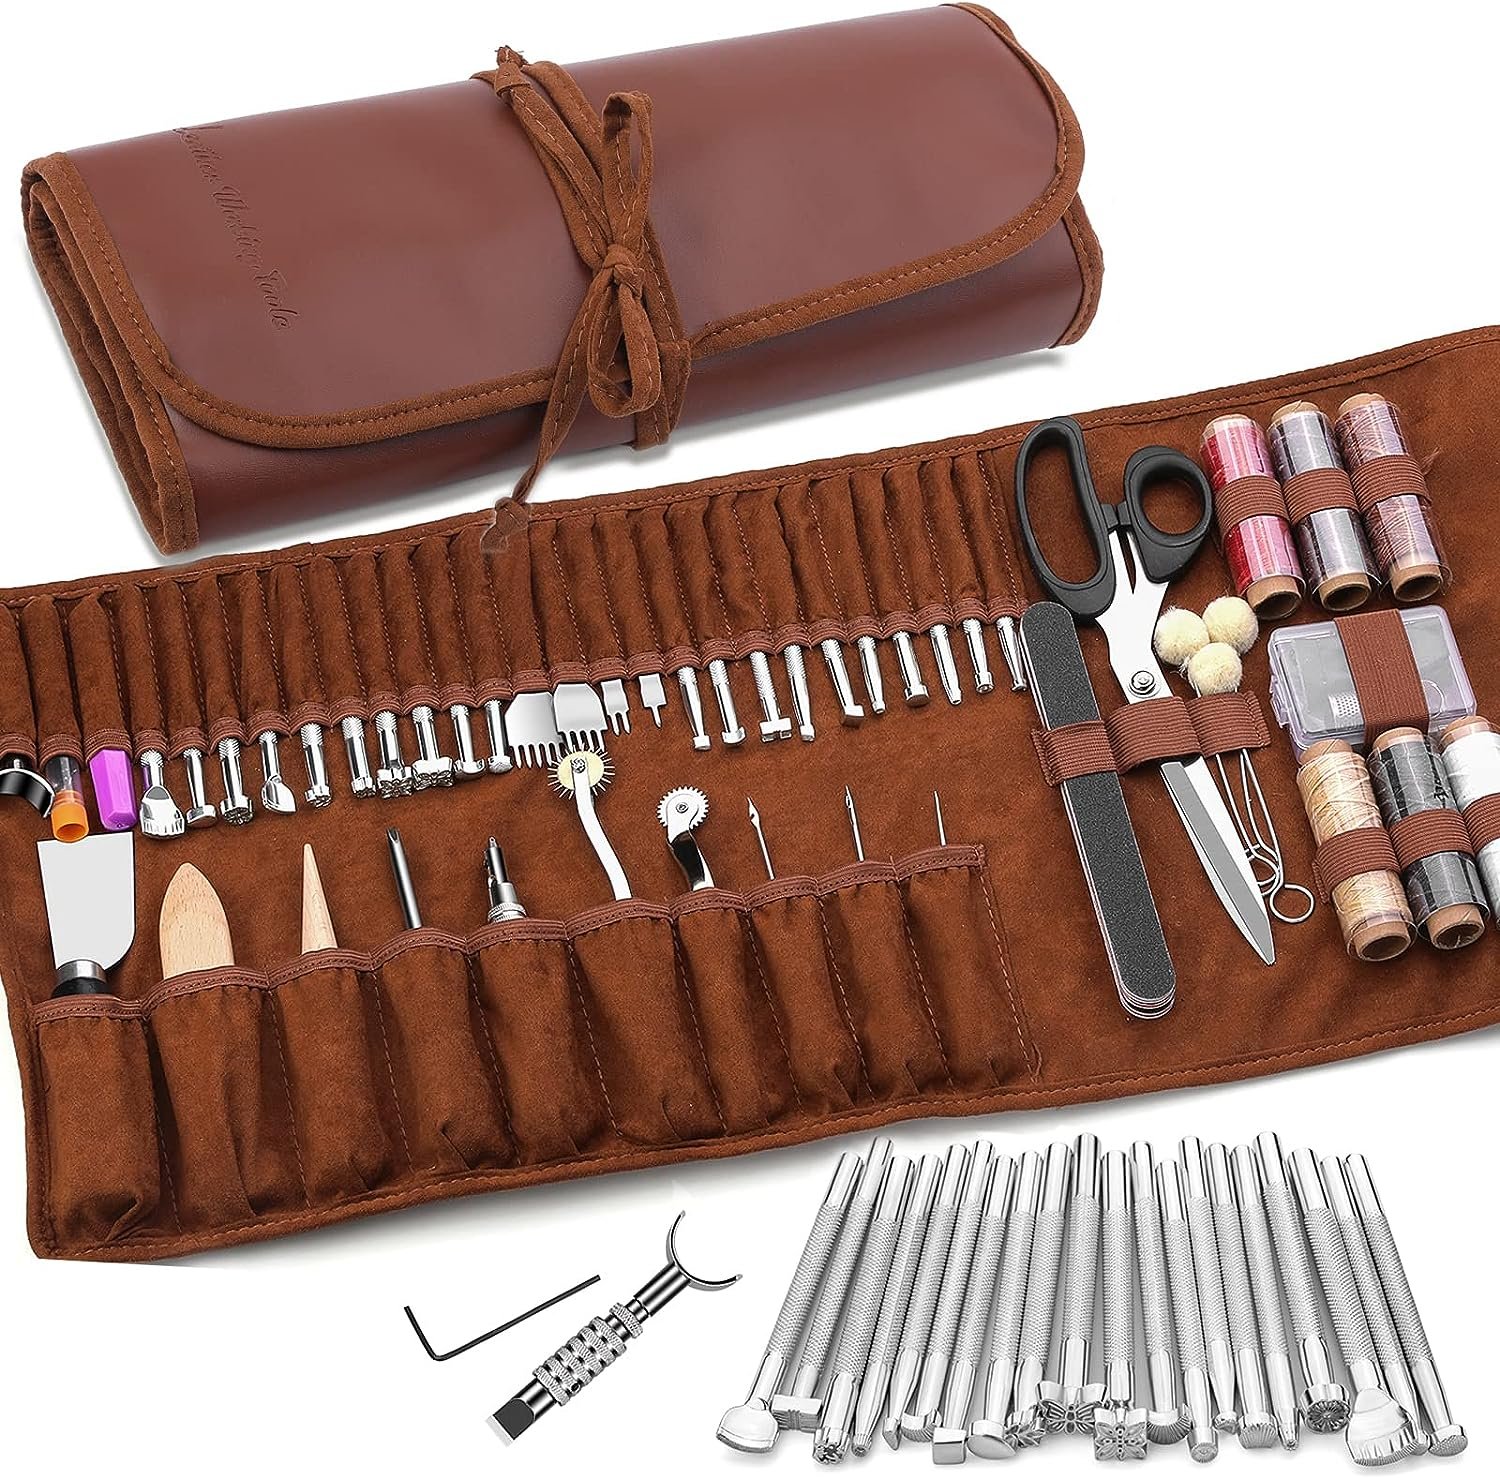 tlkkue-leather-craft-tools-kit-review